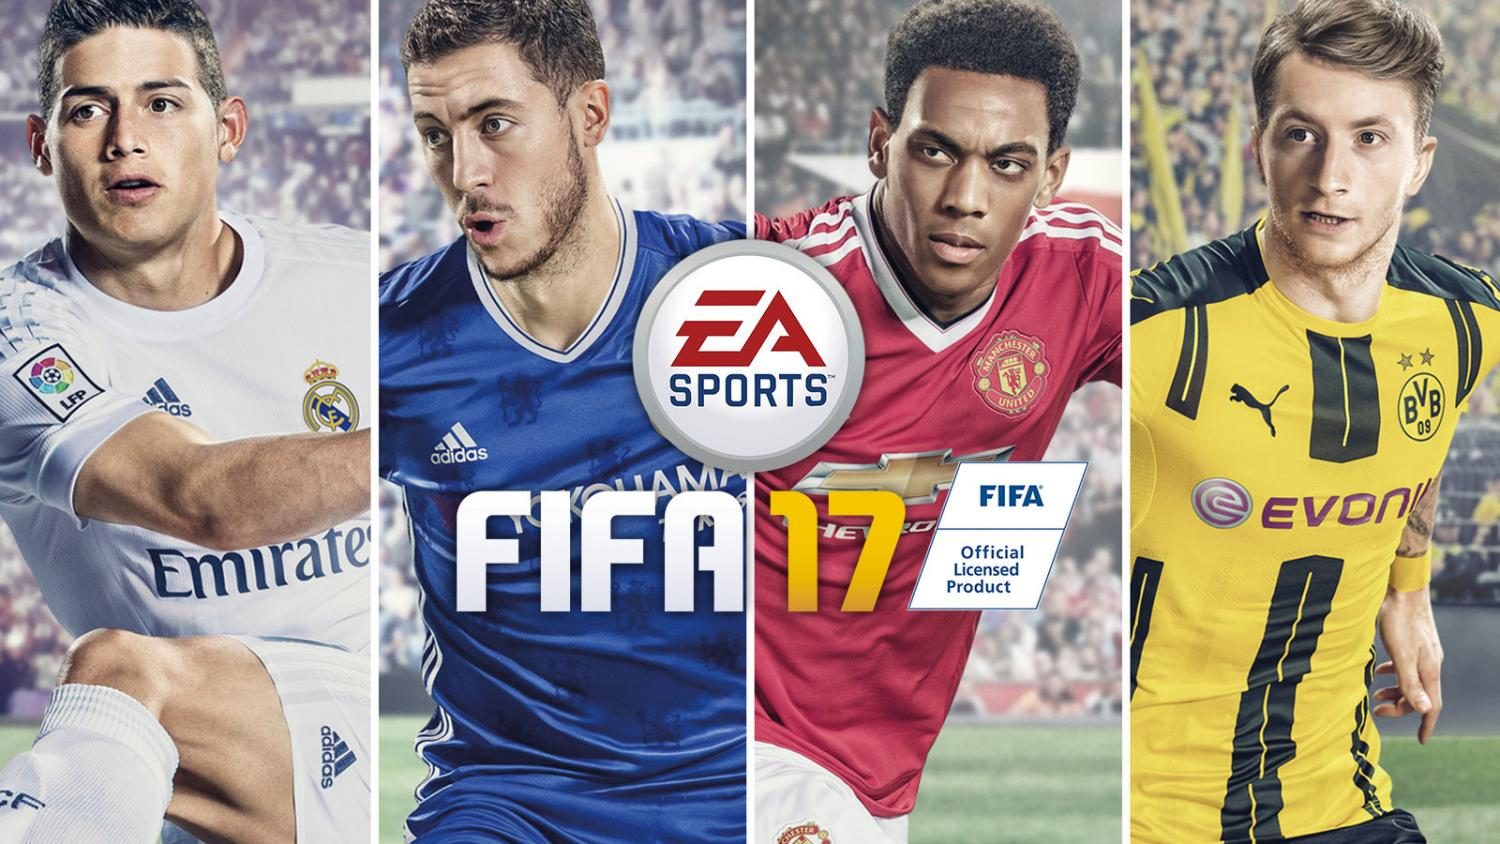 Video+Game+Review%3A+FIFA+17